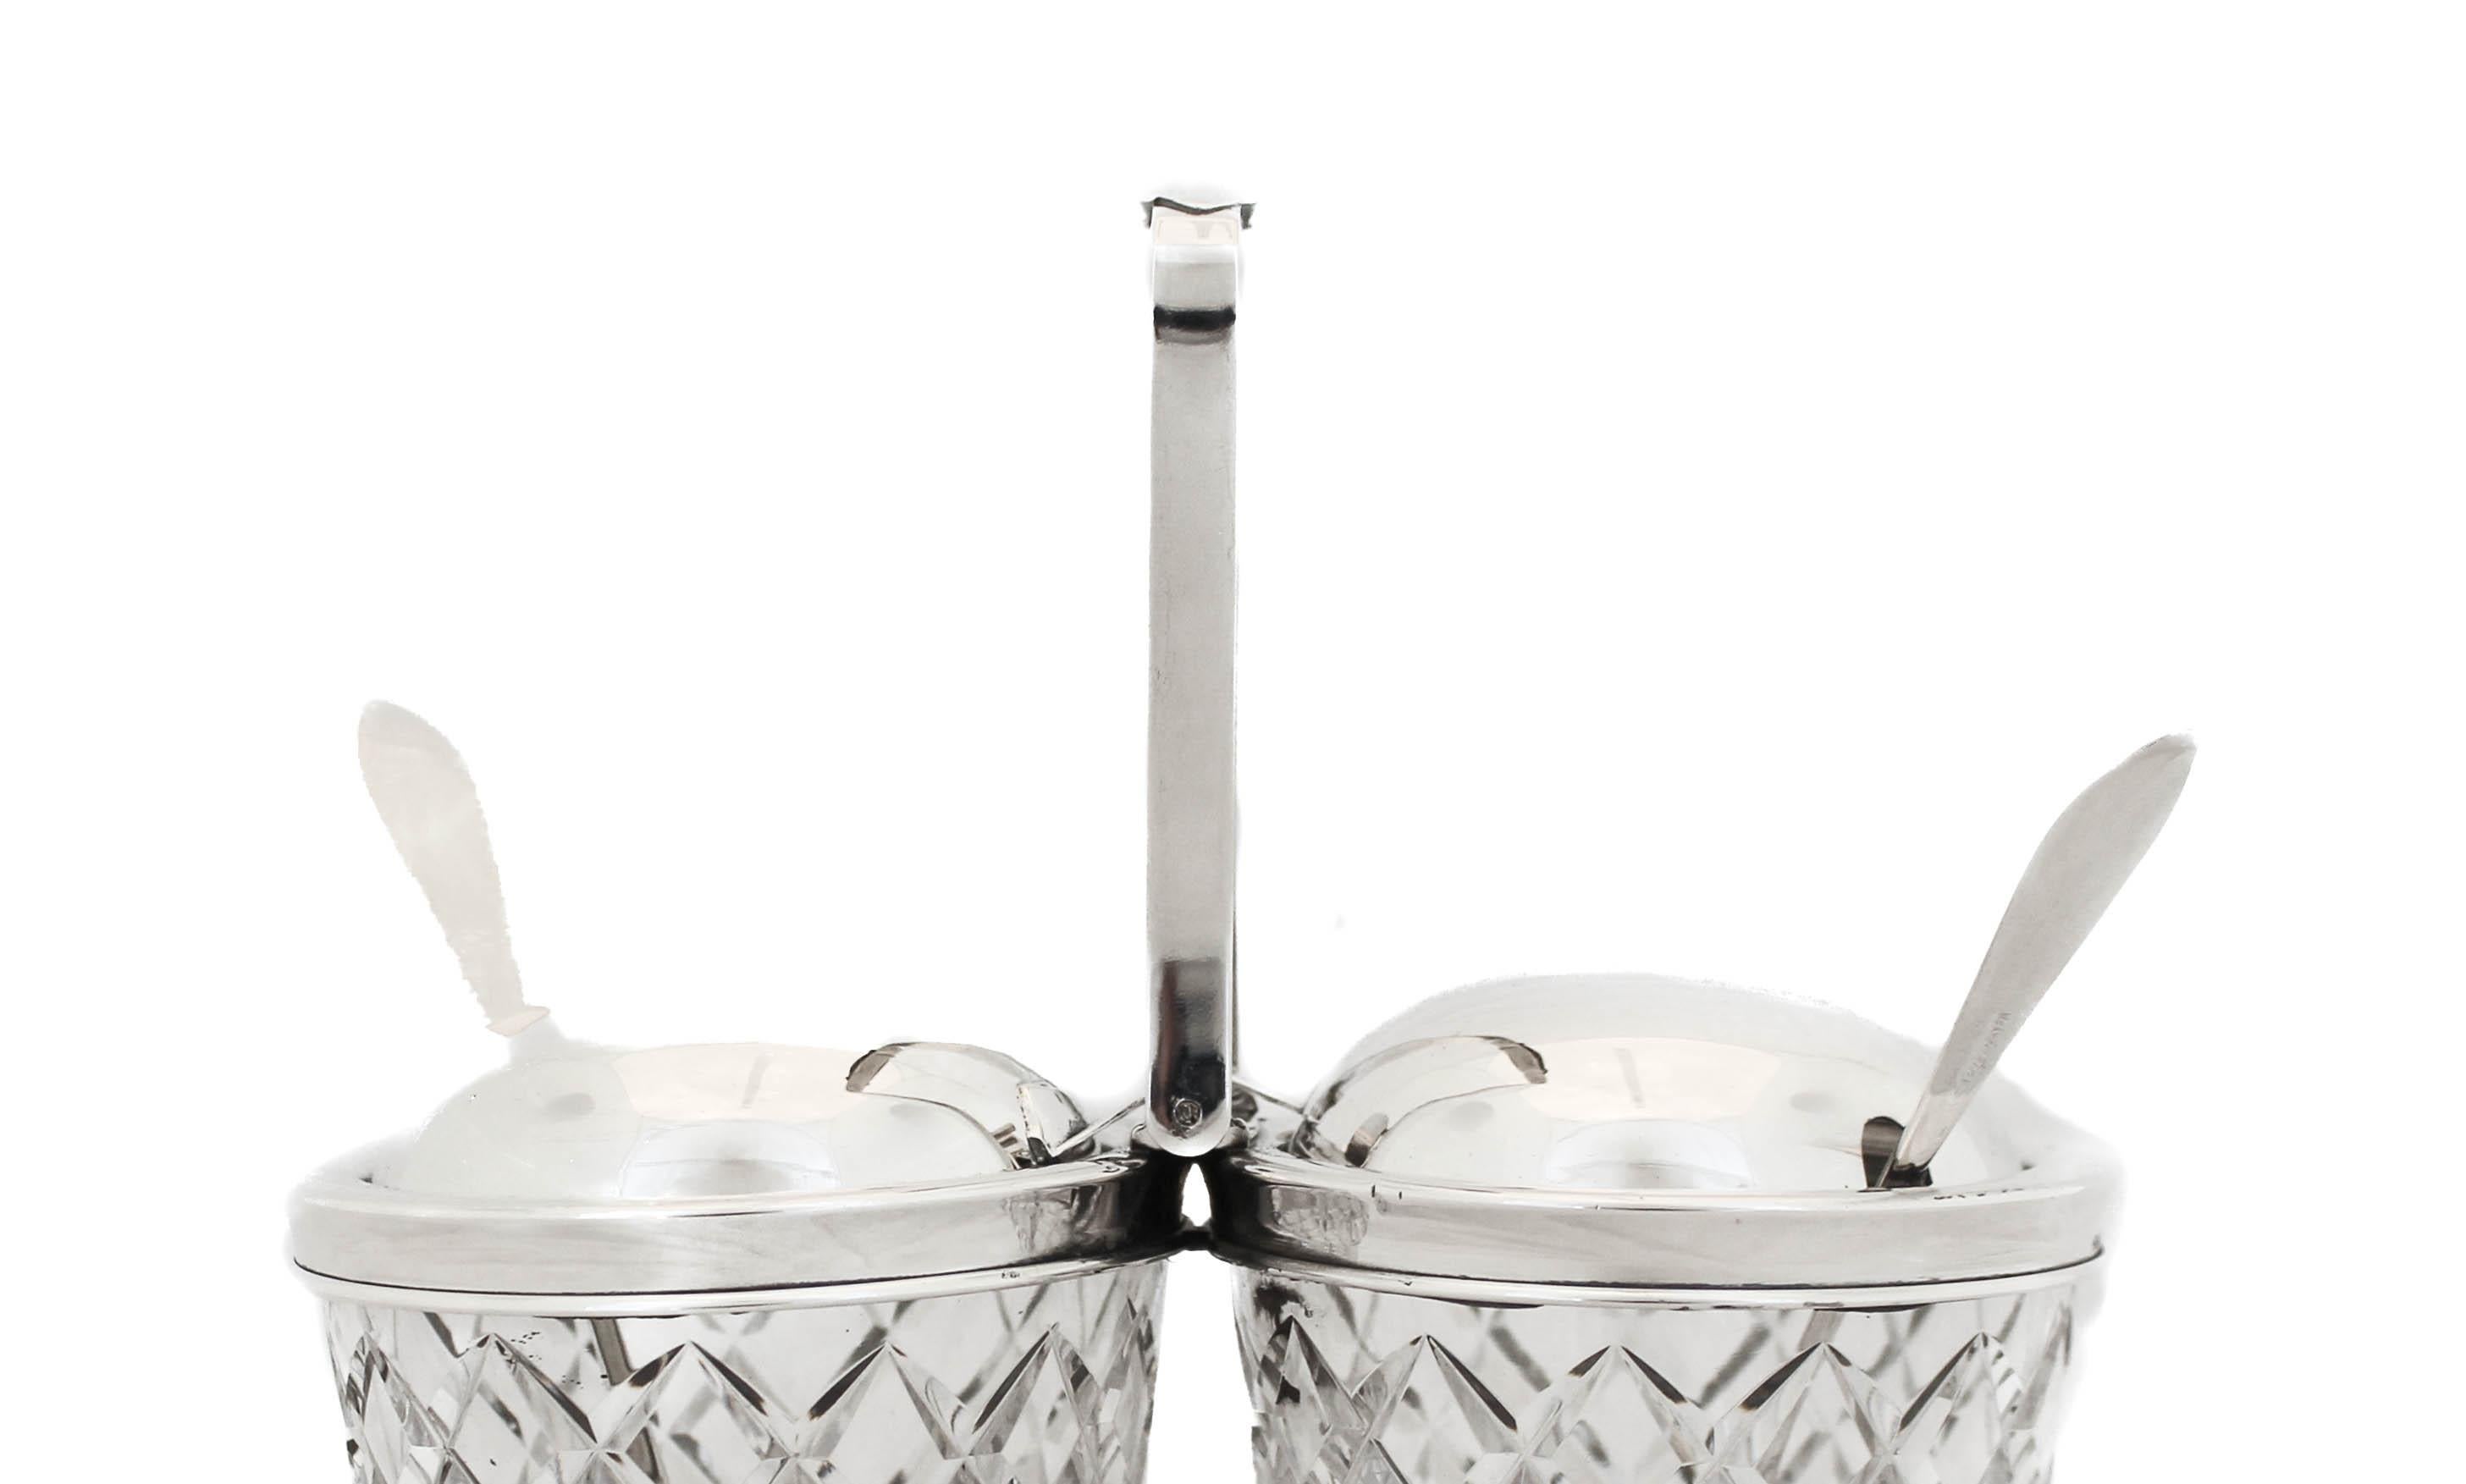 We are thrilled to offer you this rare sterling silver and crystal double condiment holder made by the Hawkes Glass Company. Based in Corning, NY, T.G. Hawkes & Co. (c.1880-1959) was established by Thomas Gibbons Hawkes (1846-1913). Born in Ireland,